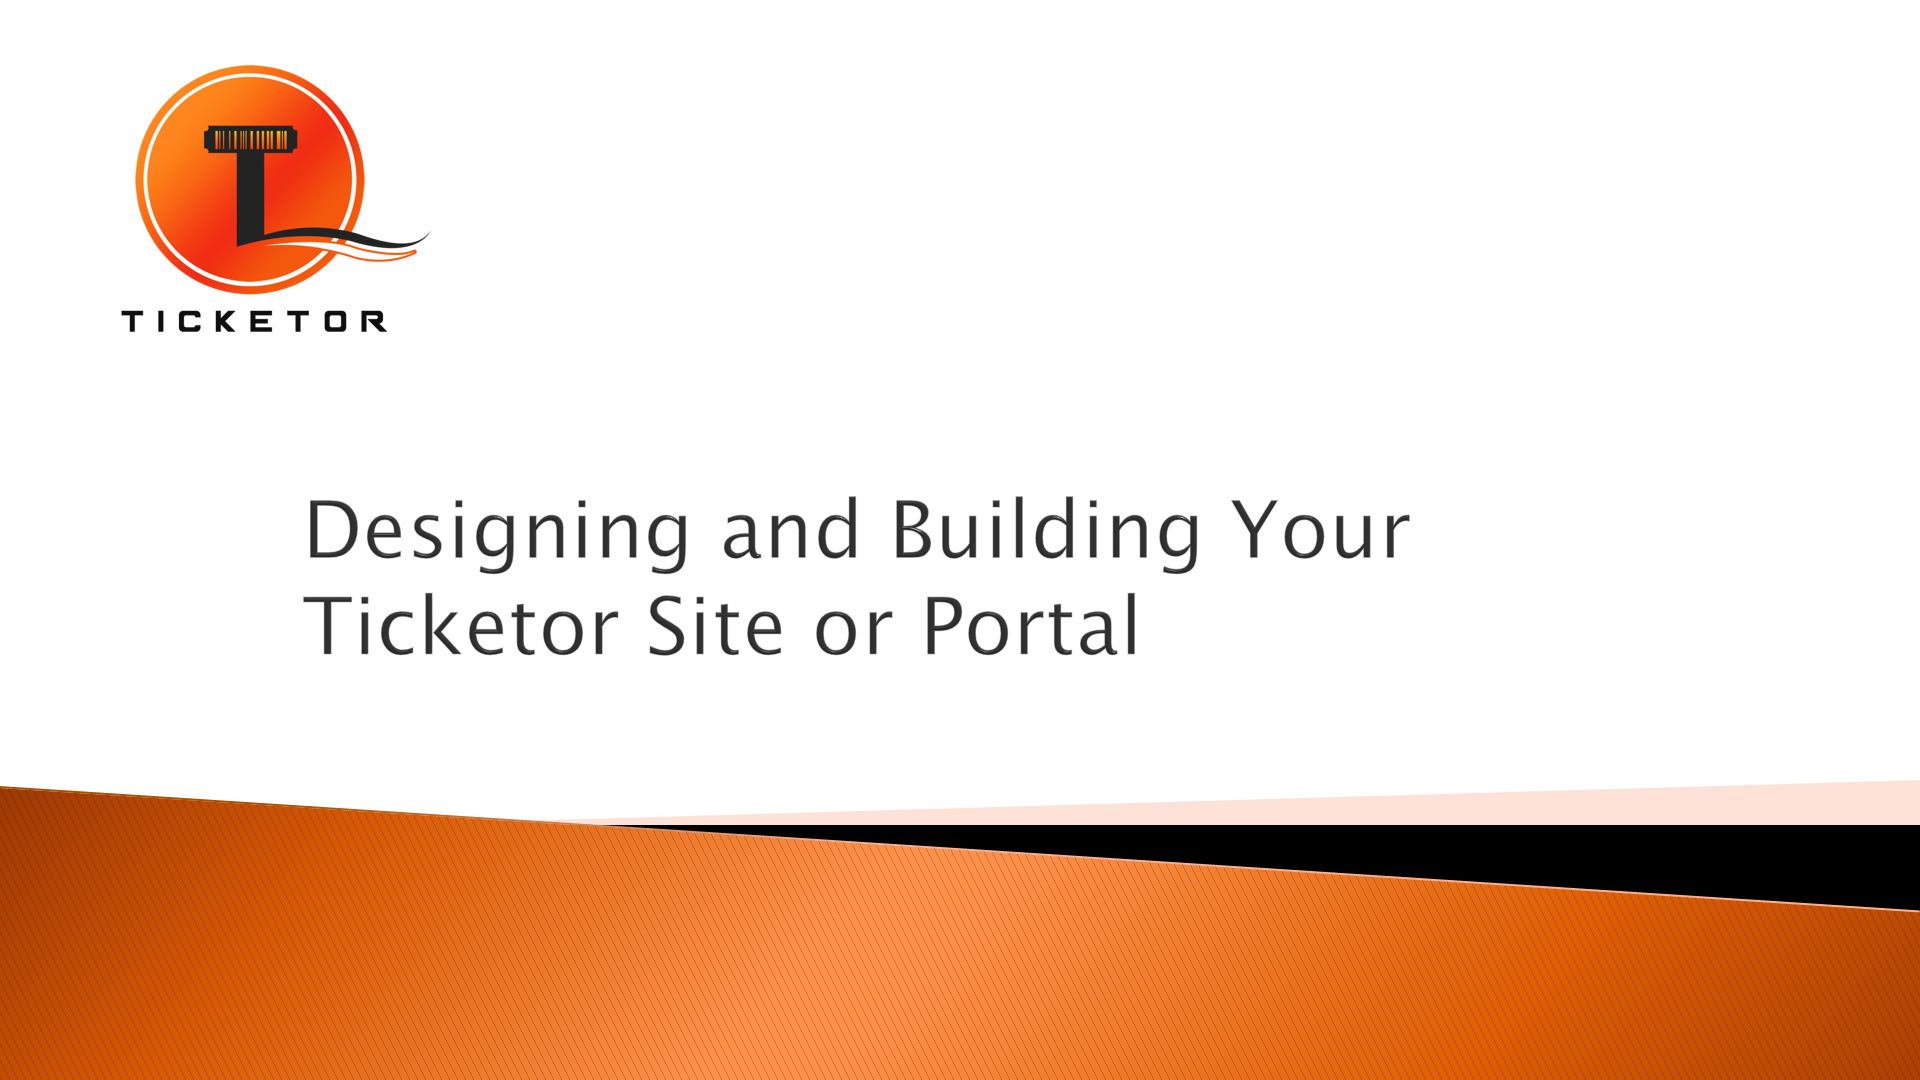 Designing and Building Your Ticketor Site or Portal or Integrating with Your Site